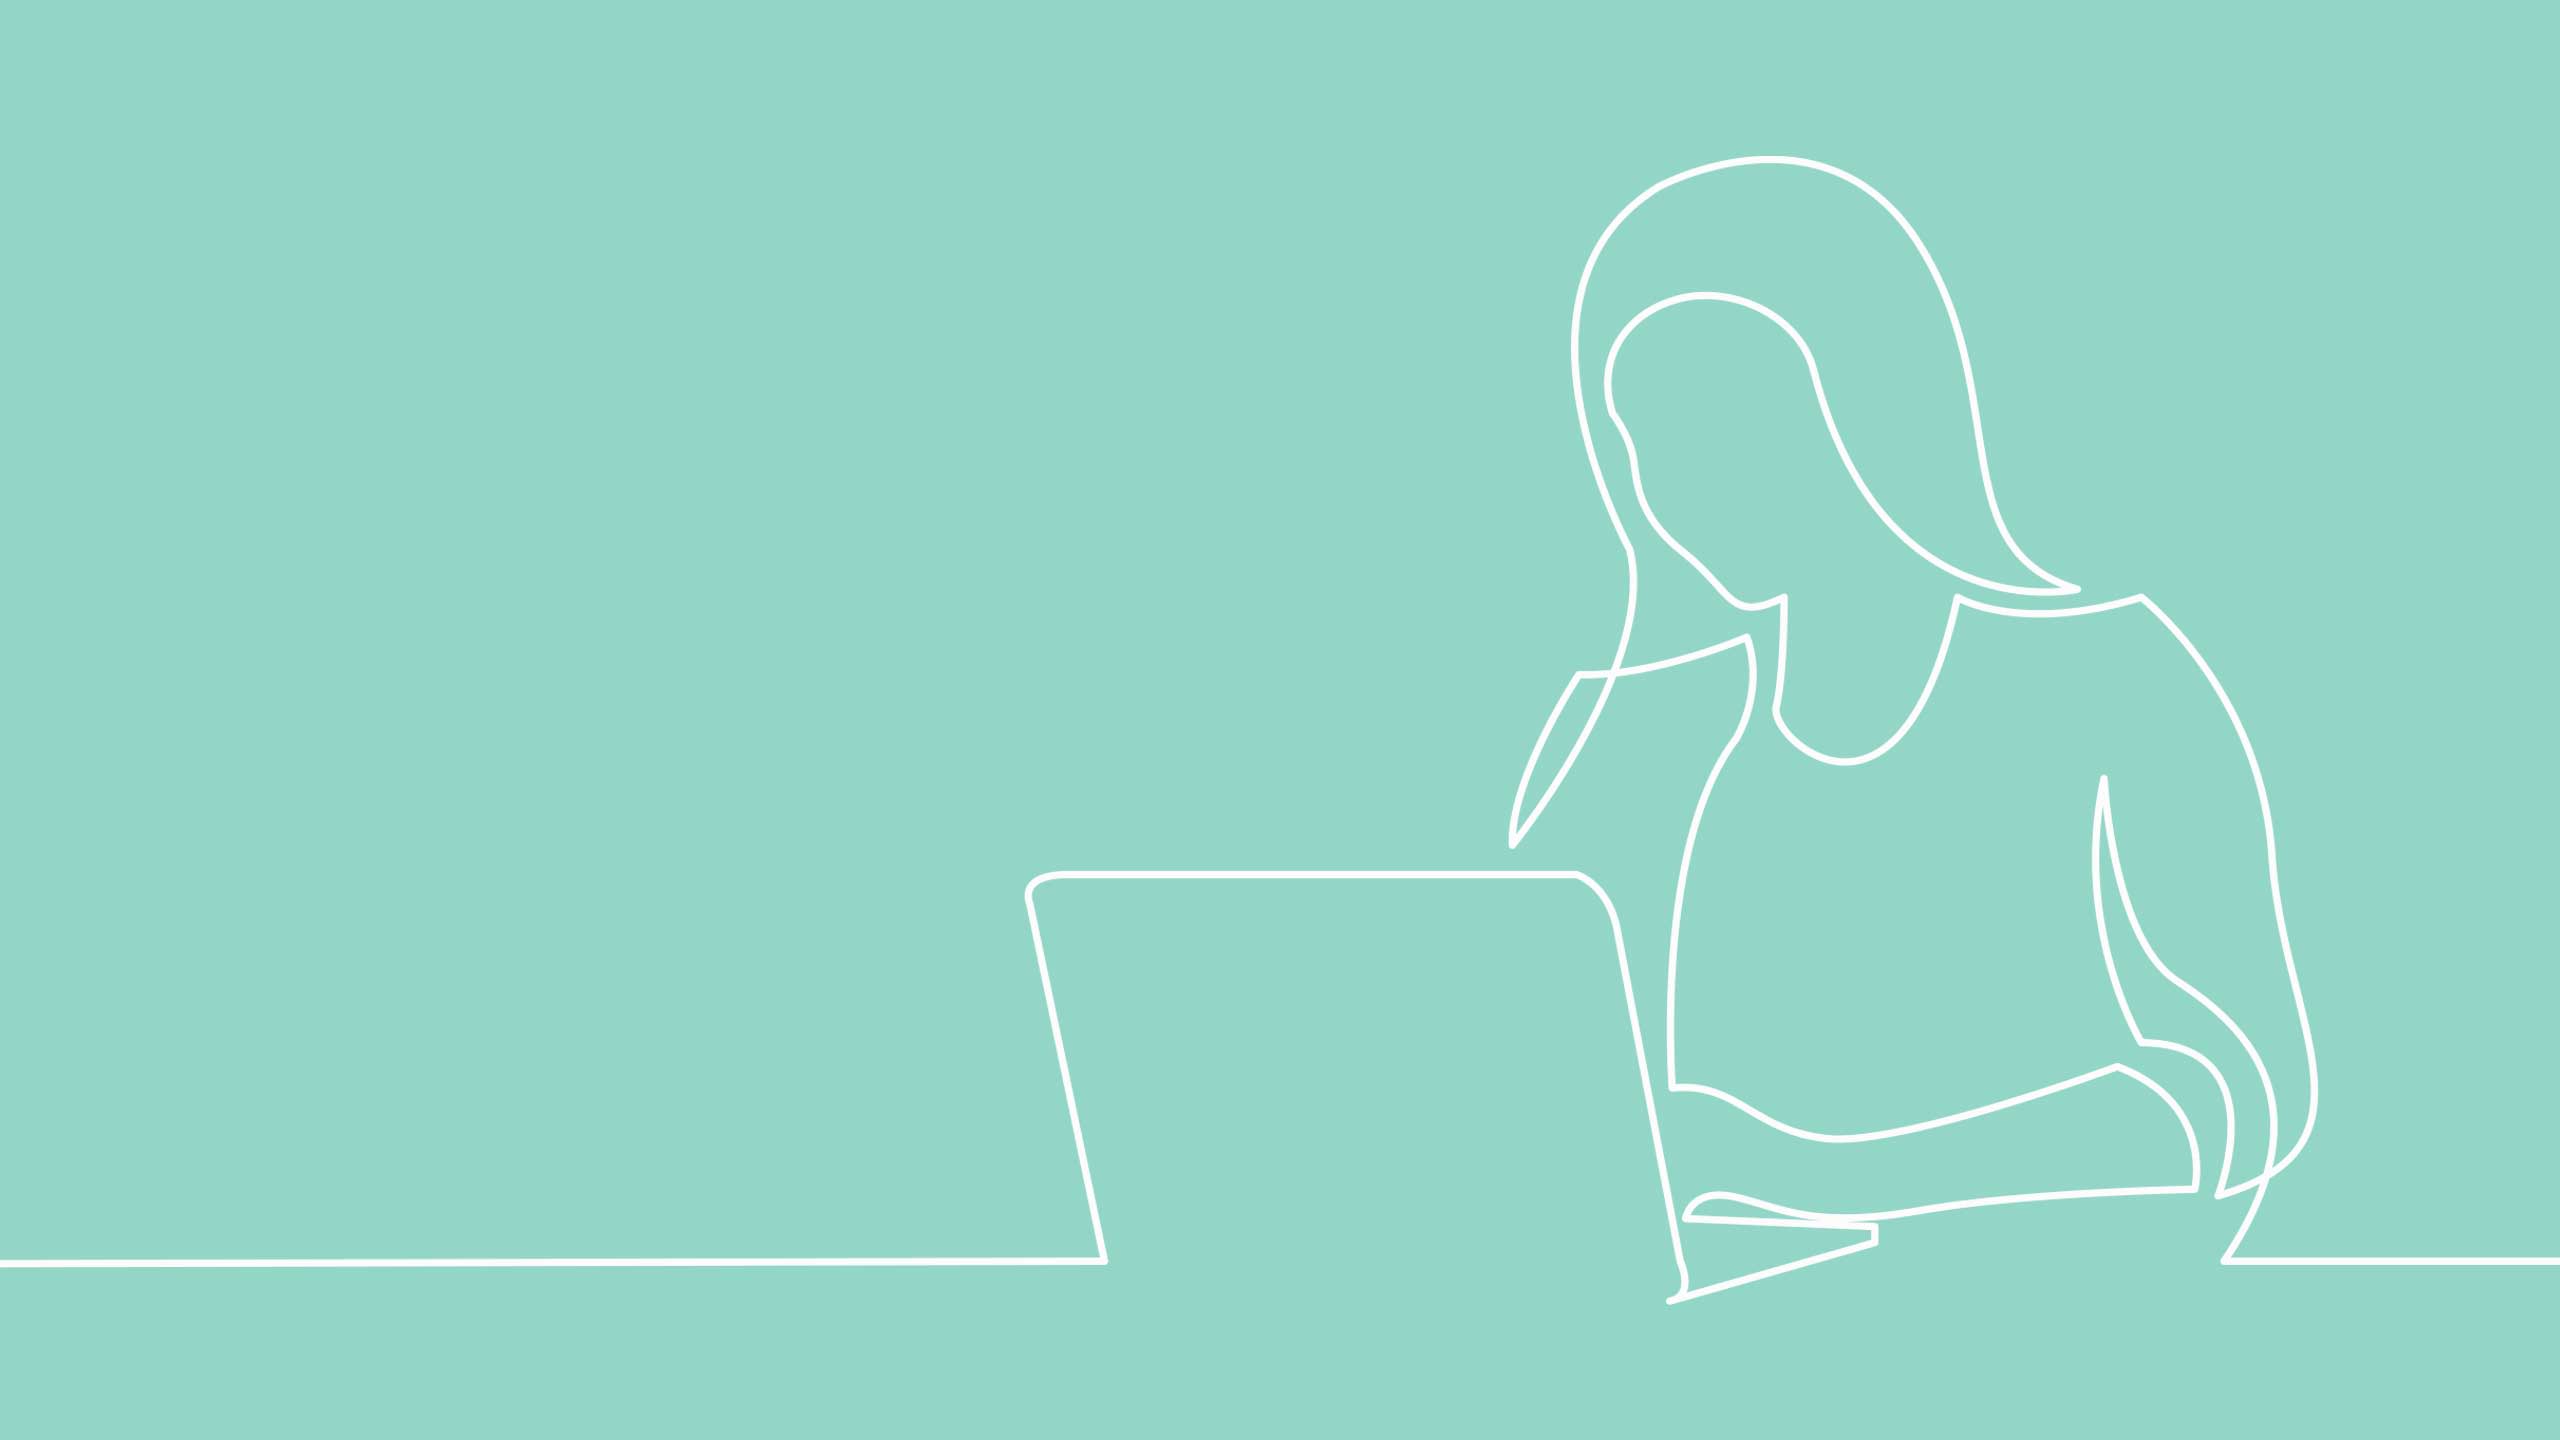 White sketched outline of a person with a laptop on a pale turquoise background